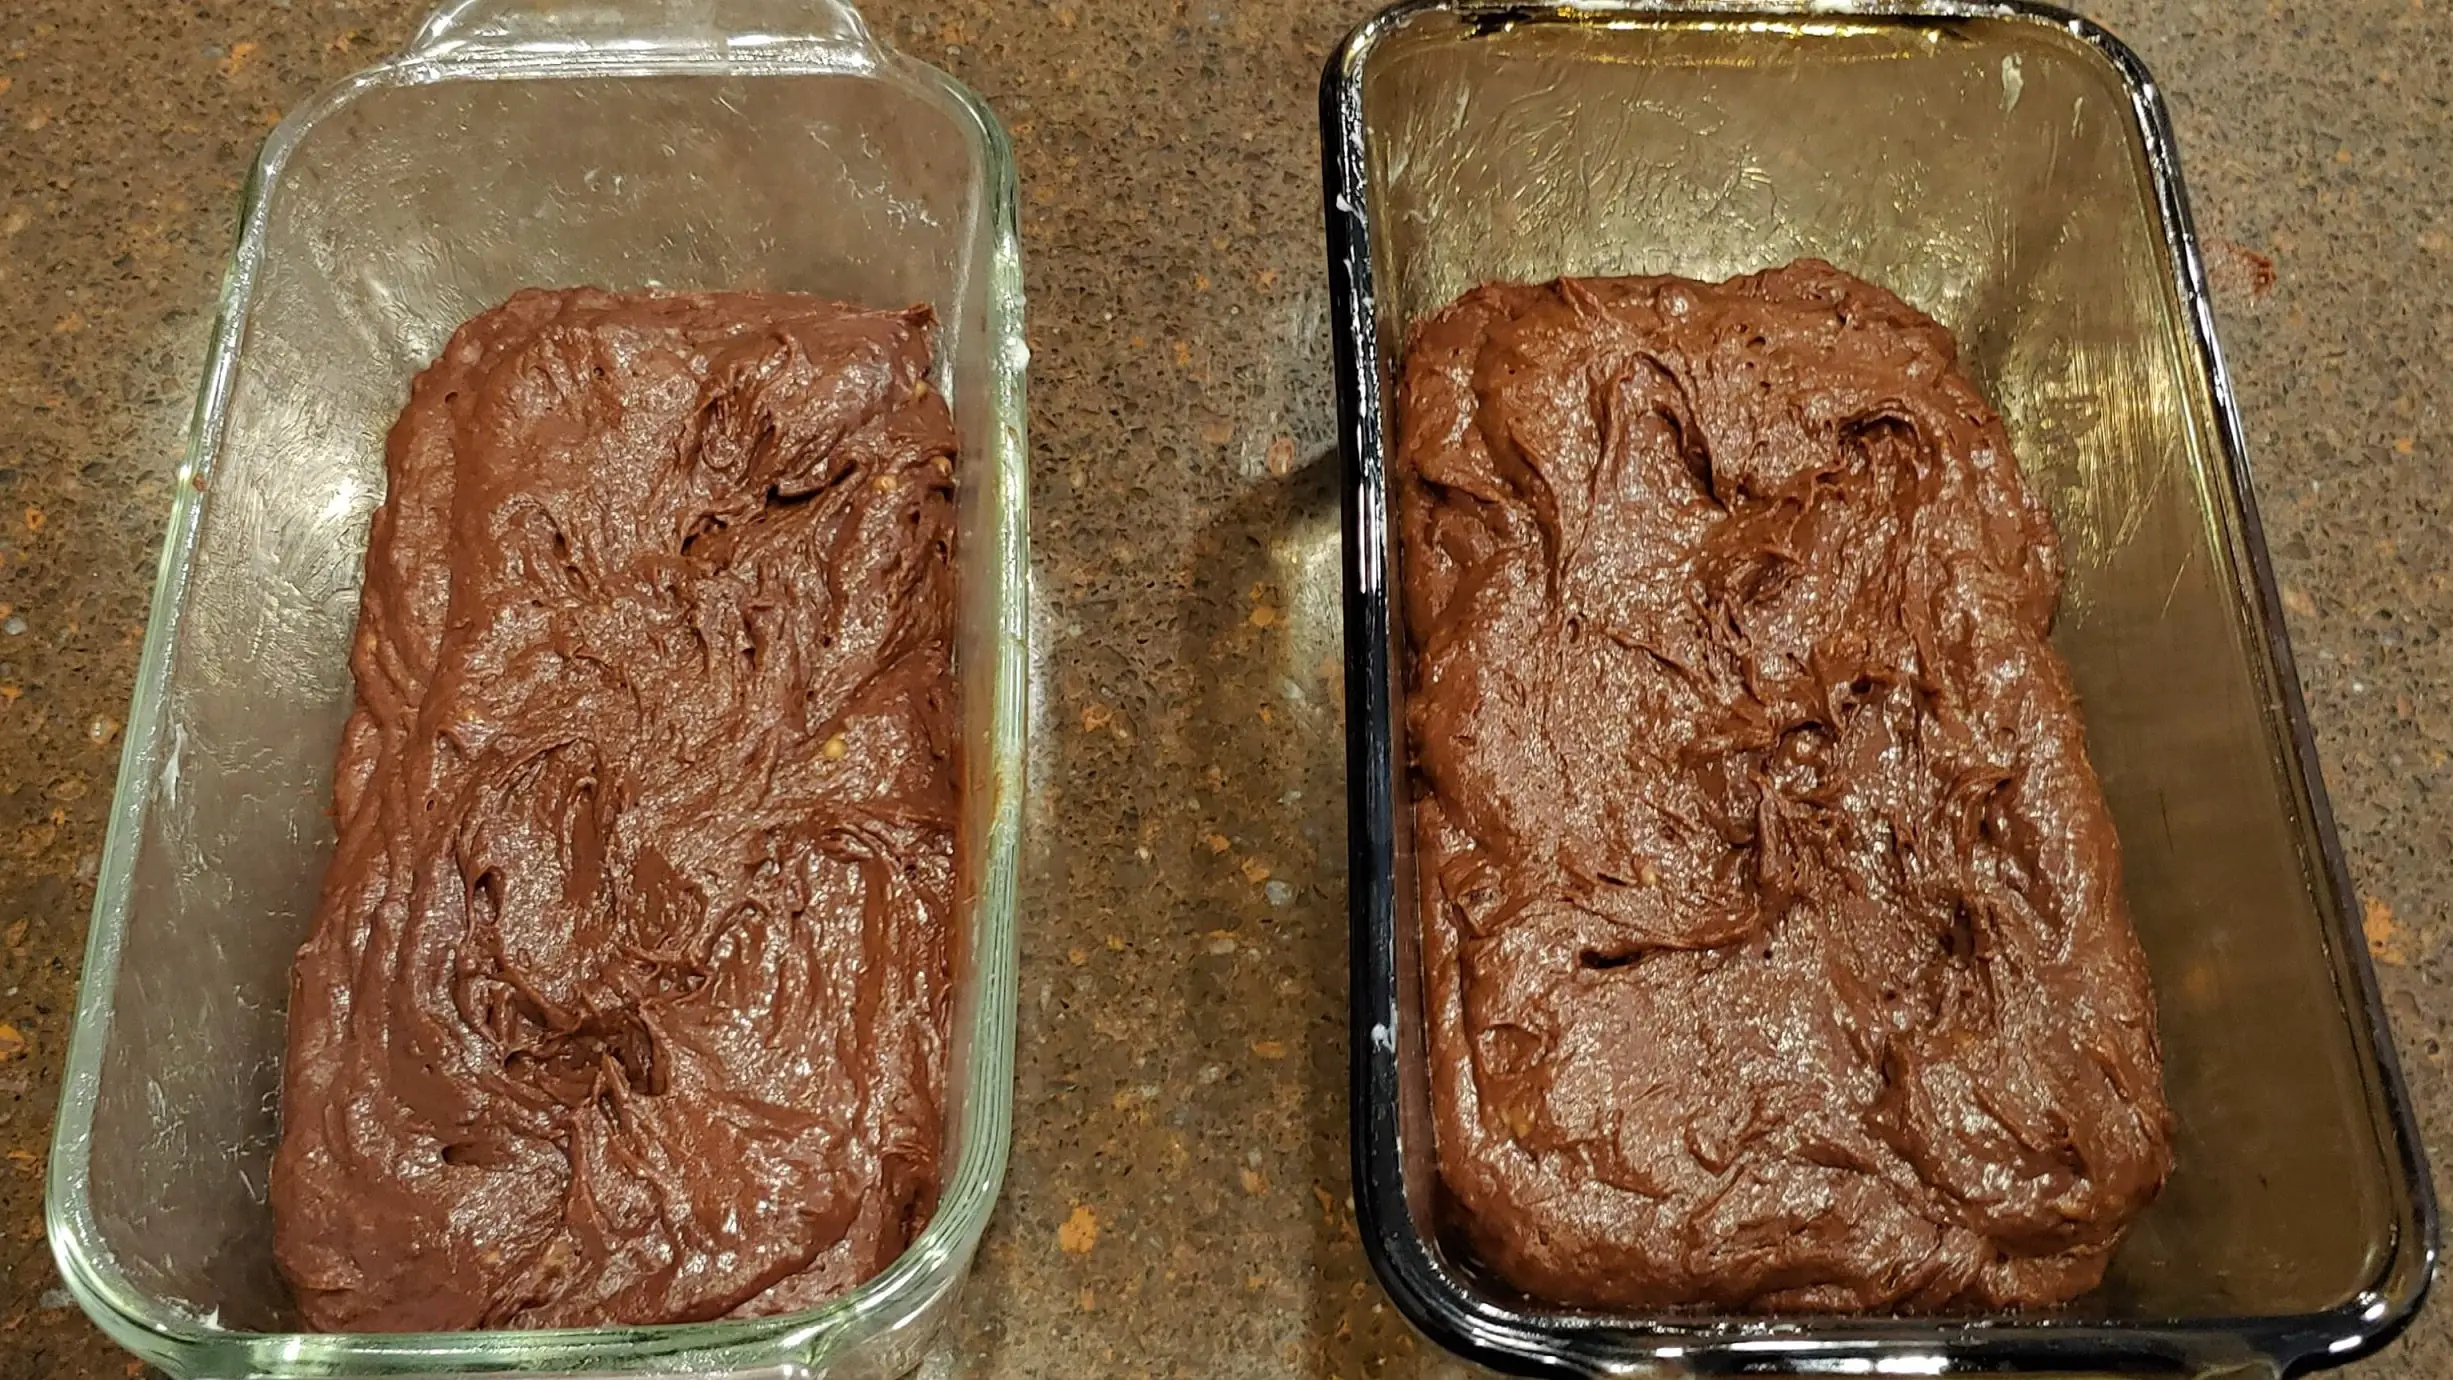 Chocolate Banana Bread ready to bake - Dining in with Danielle